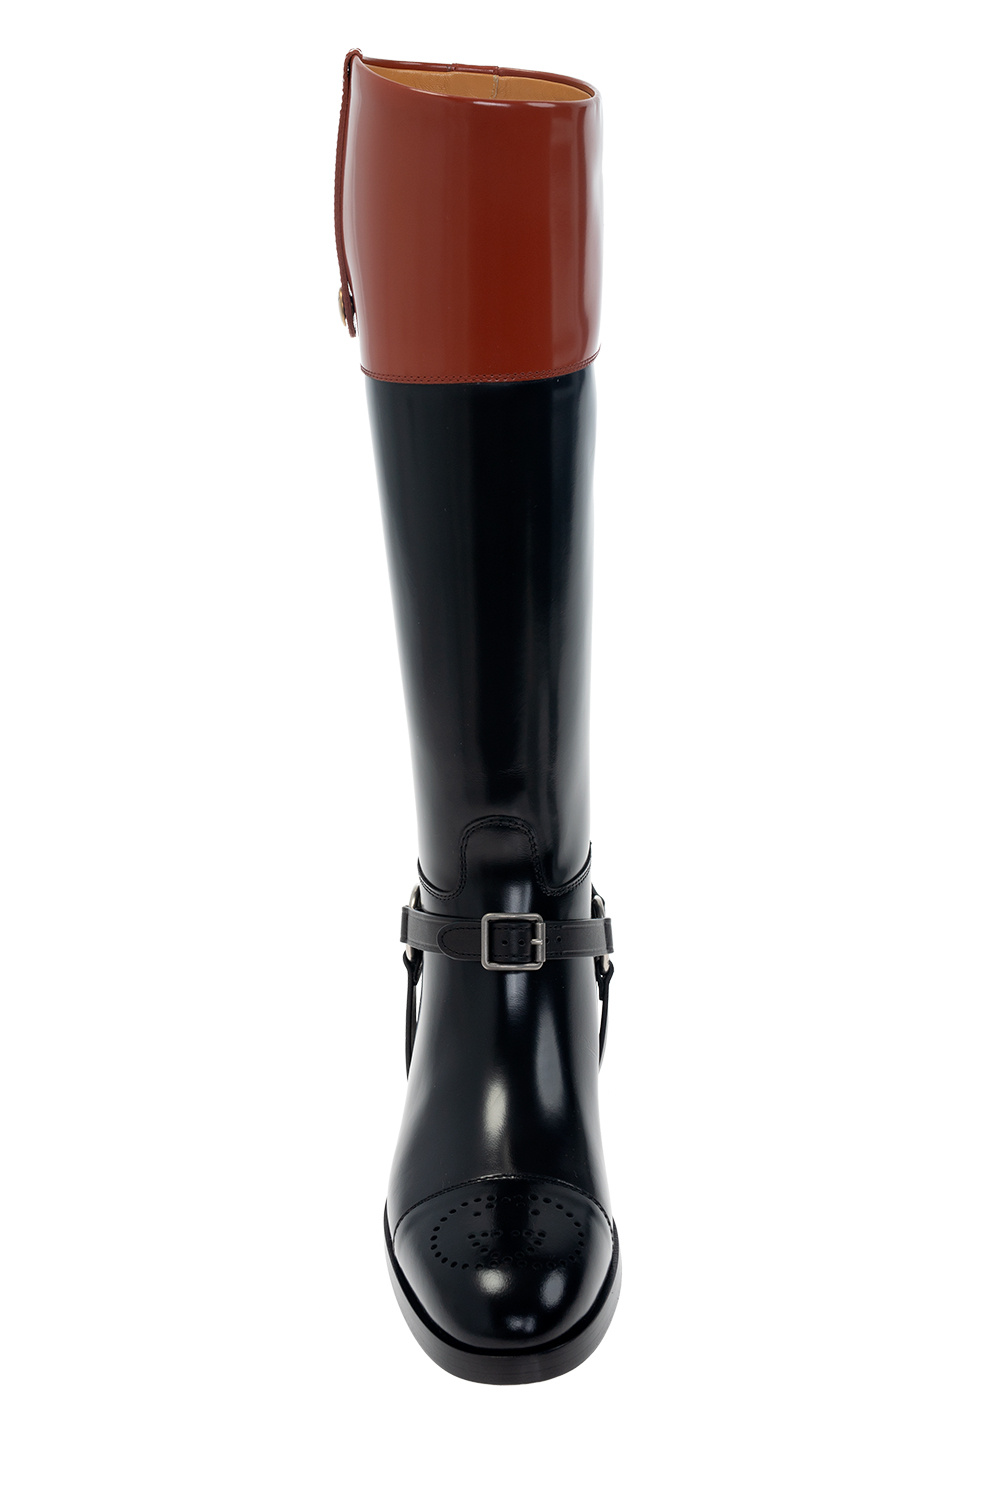 Gucci Leather knee-high boots